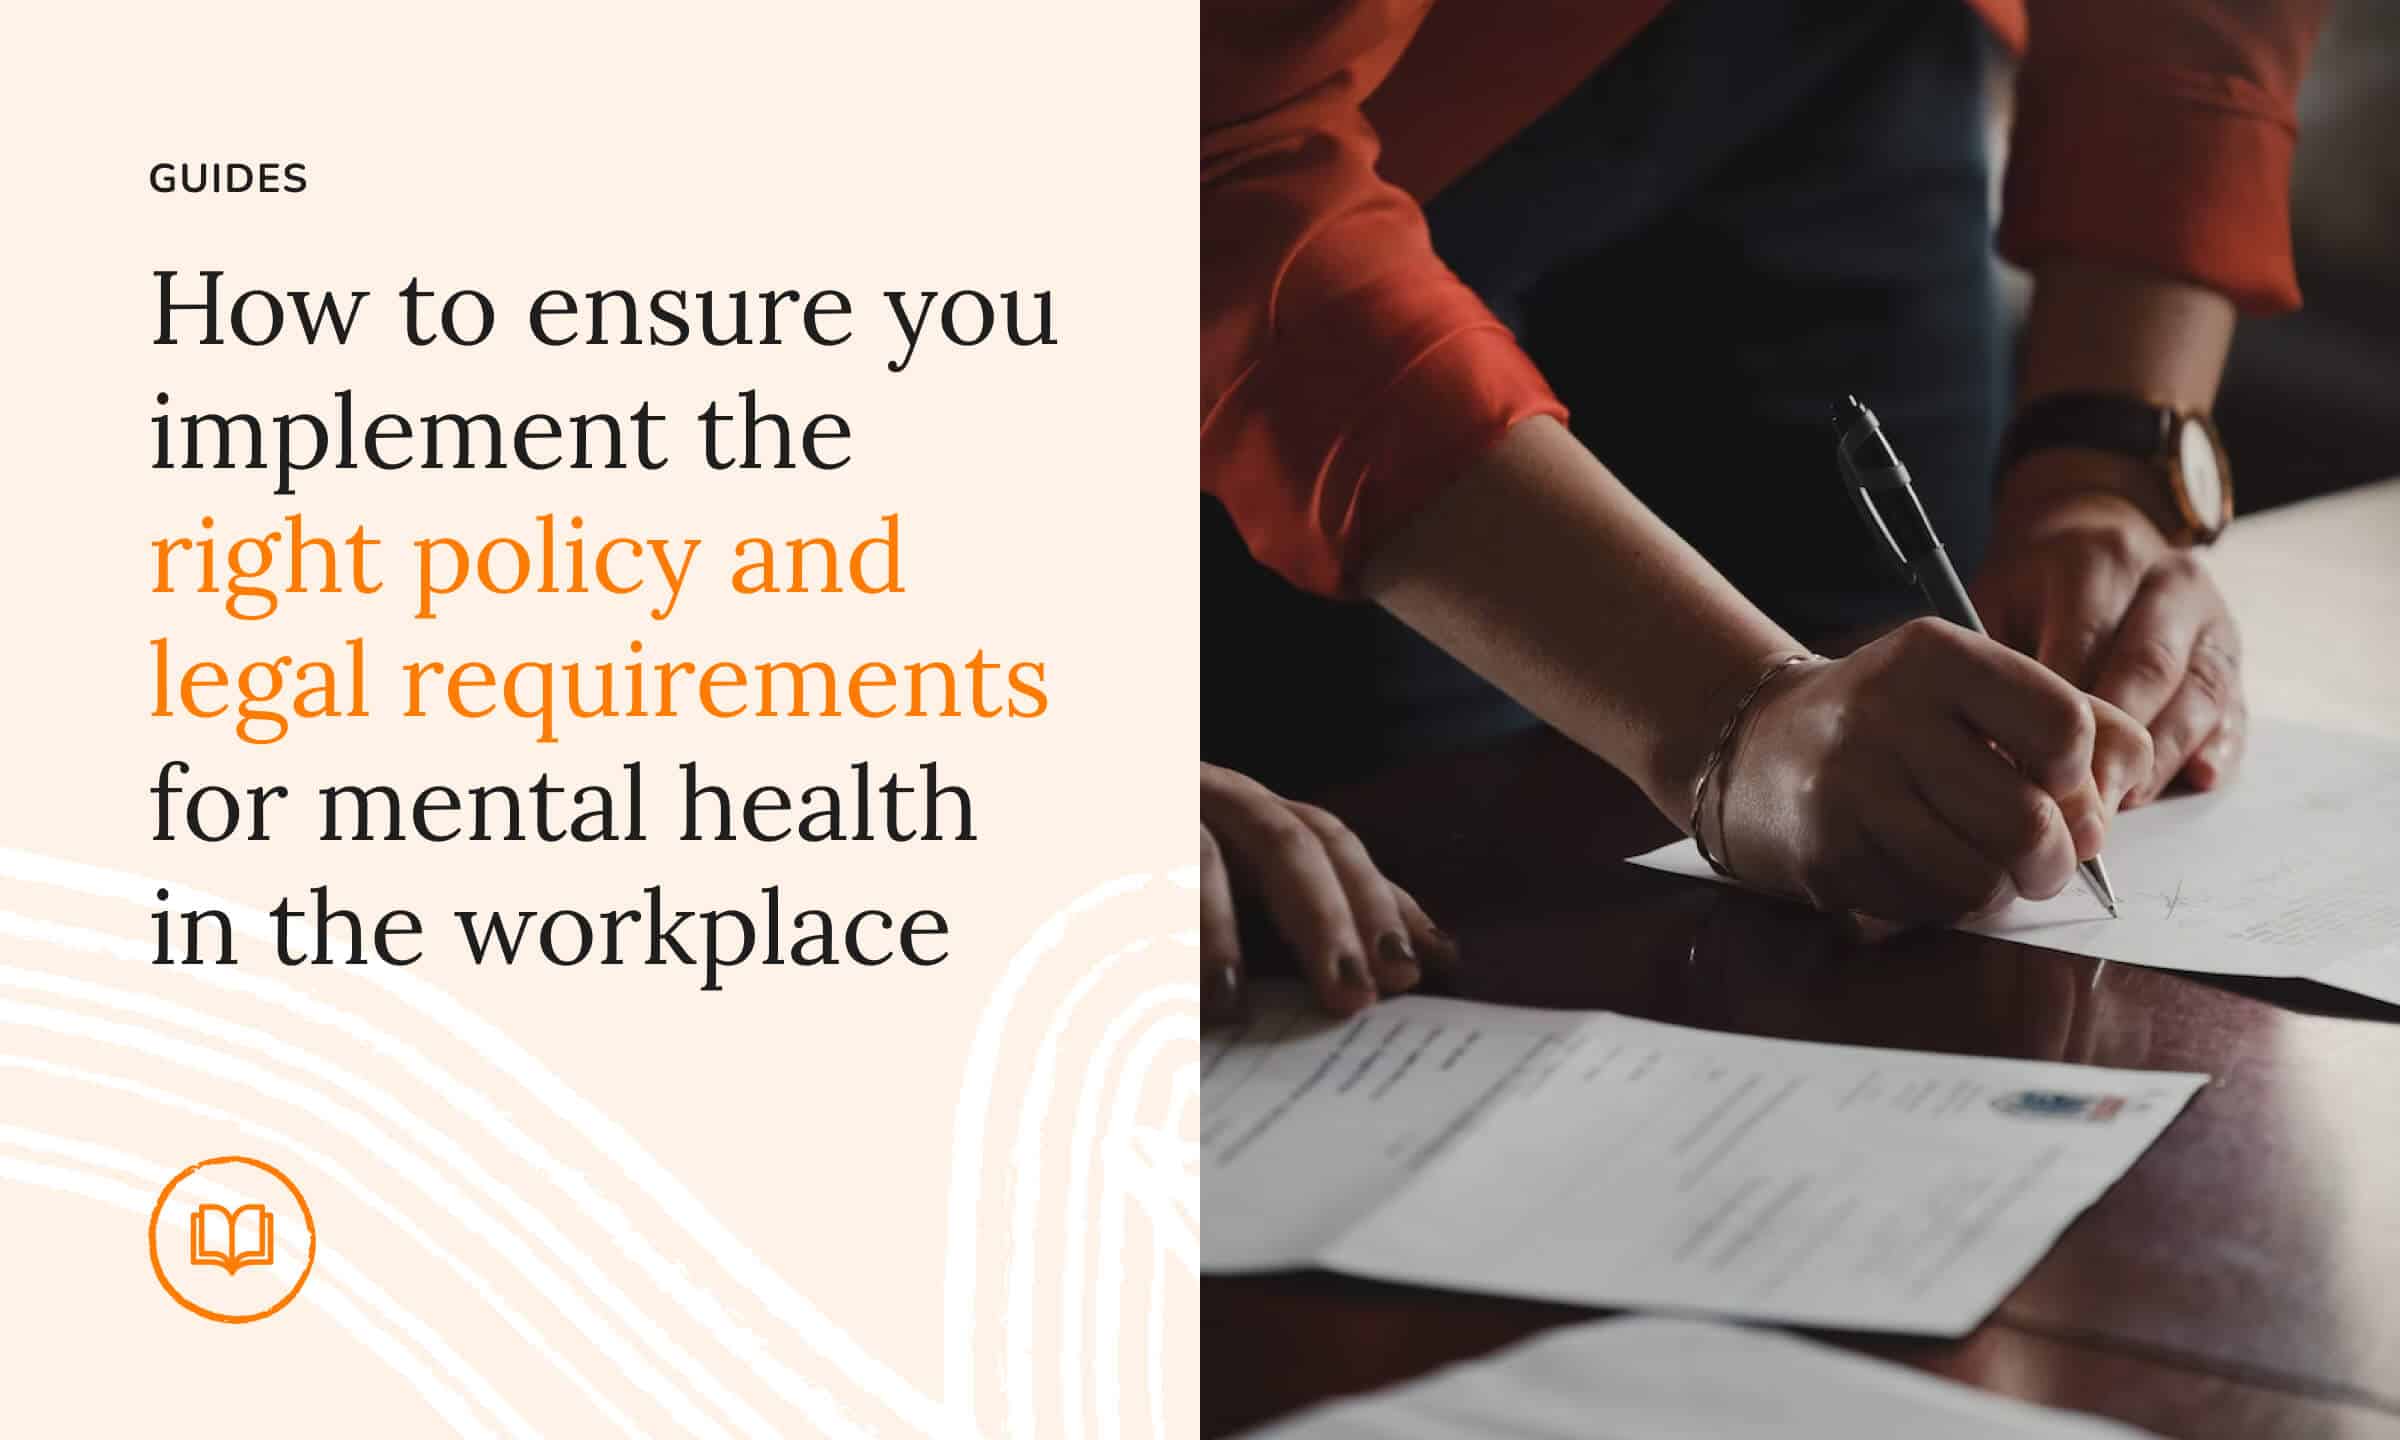 How to ensure you implement the right policy and legal requirements for mental health in the workplace